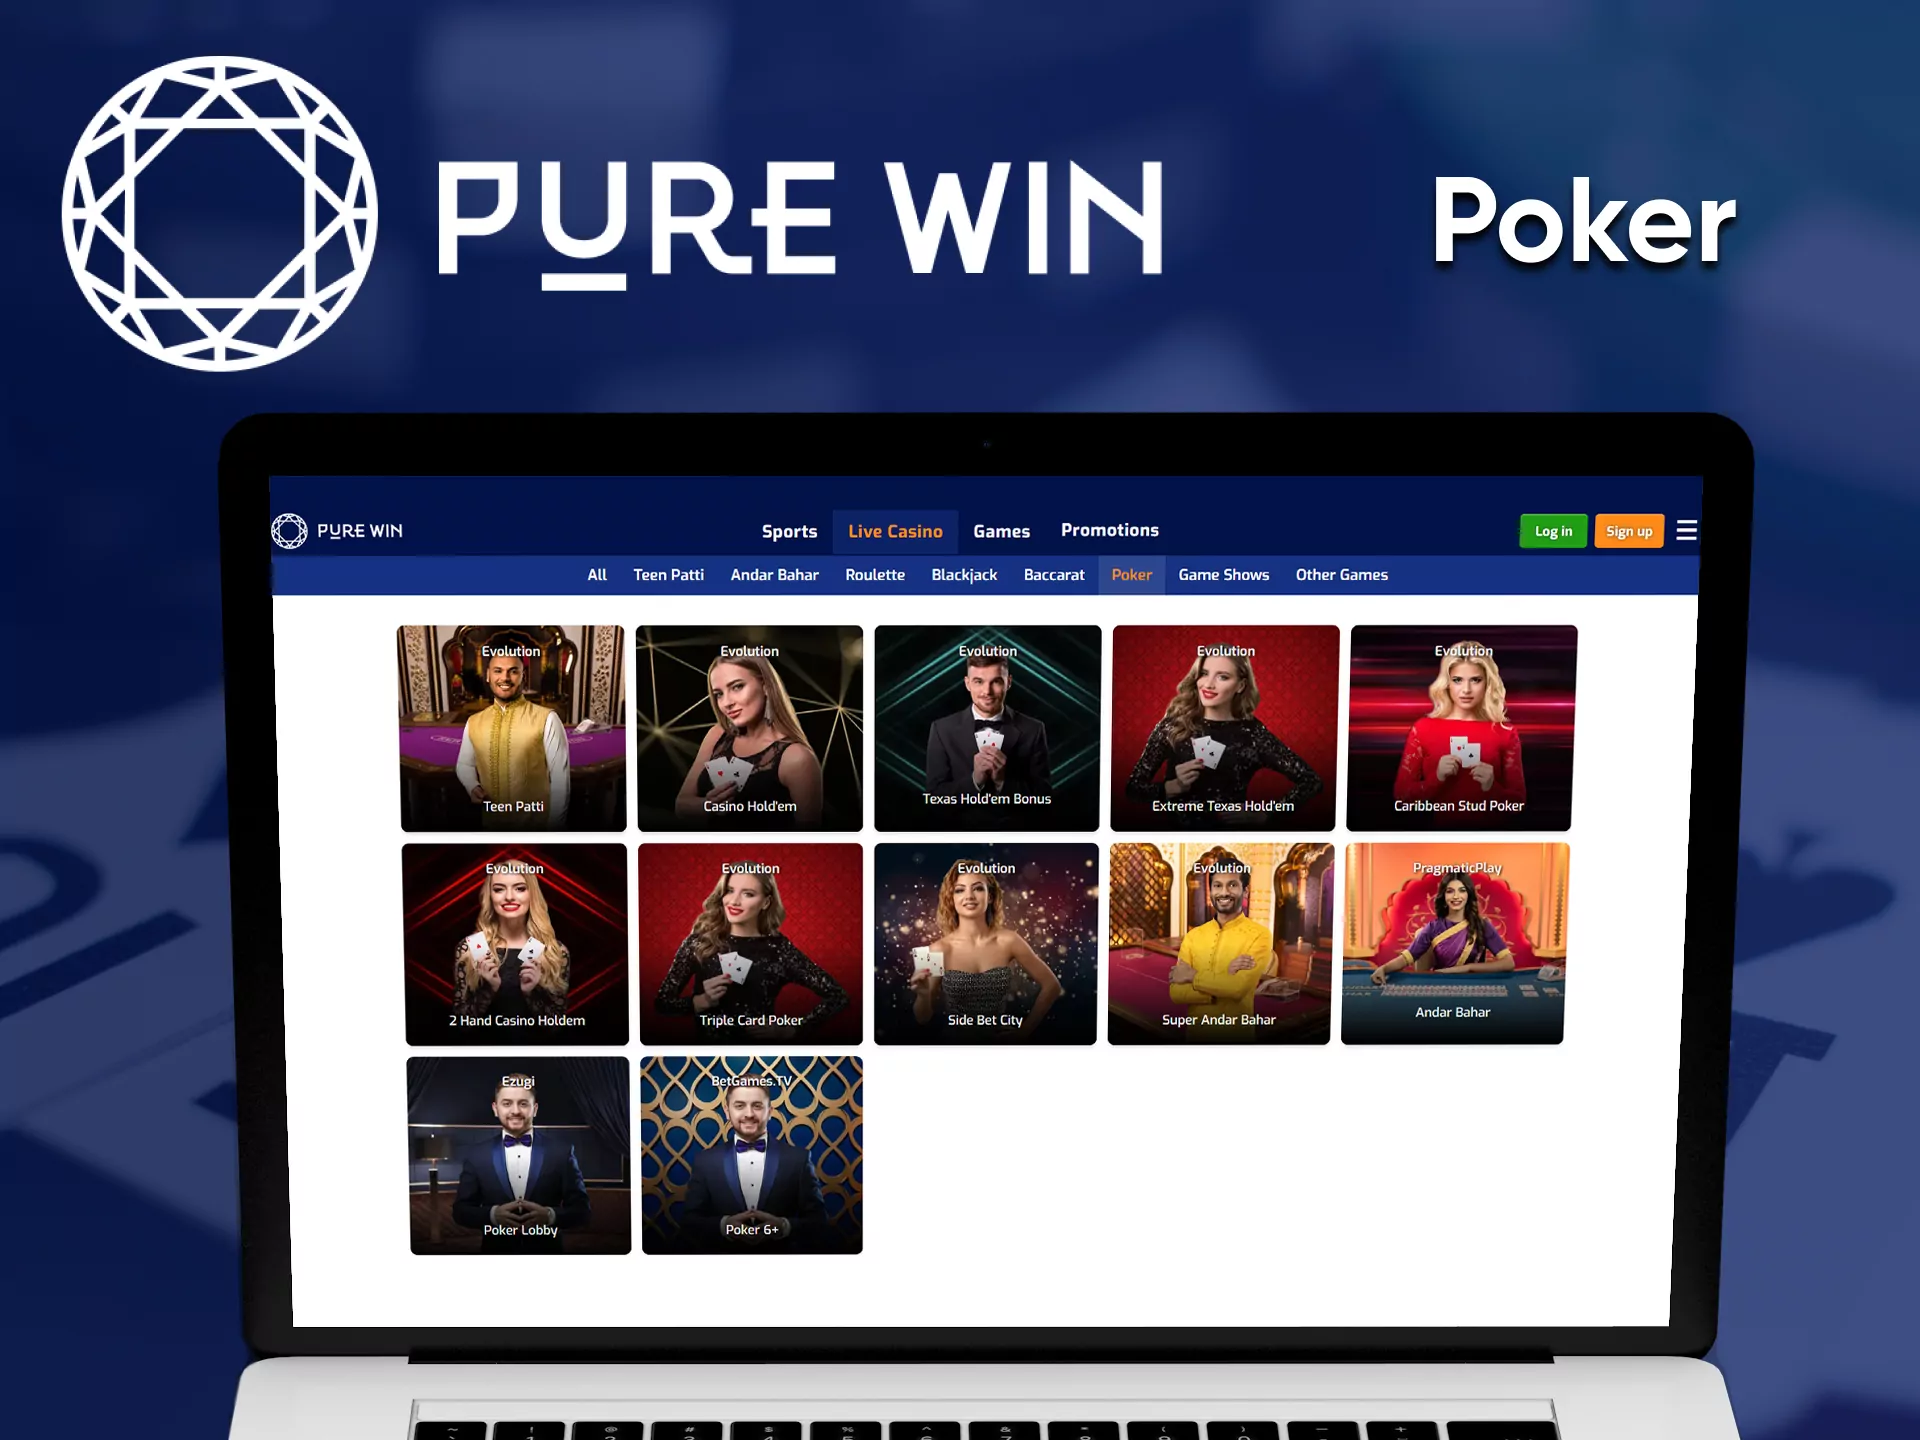 Choose a section with Poker from Pure Win.